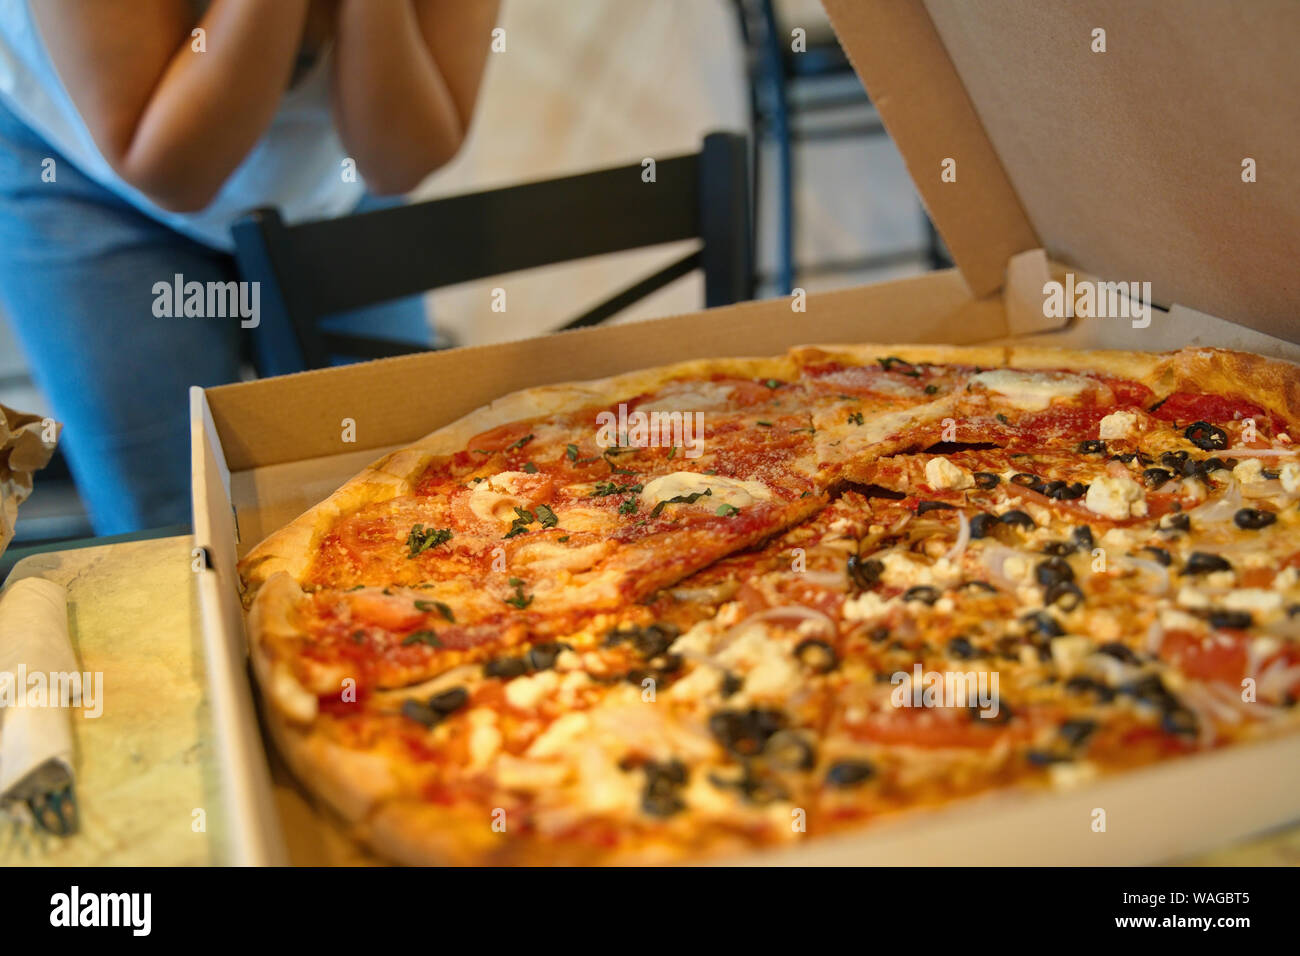 A steaming hot combination pizza in a box with an excited customer in the backgound. Stock Photo